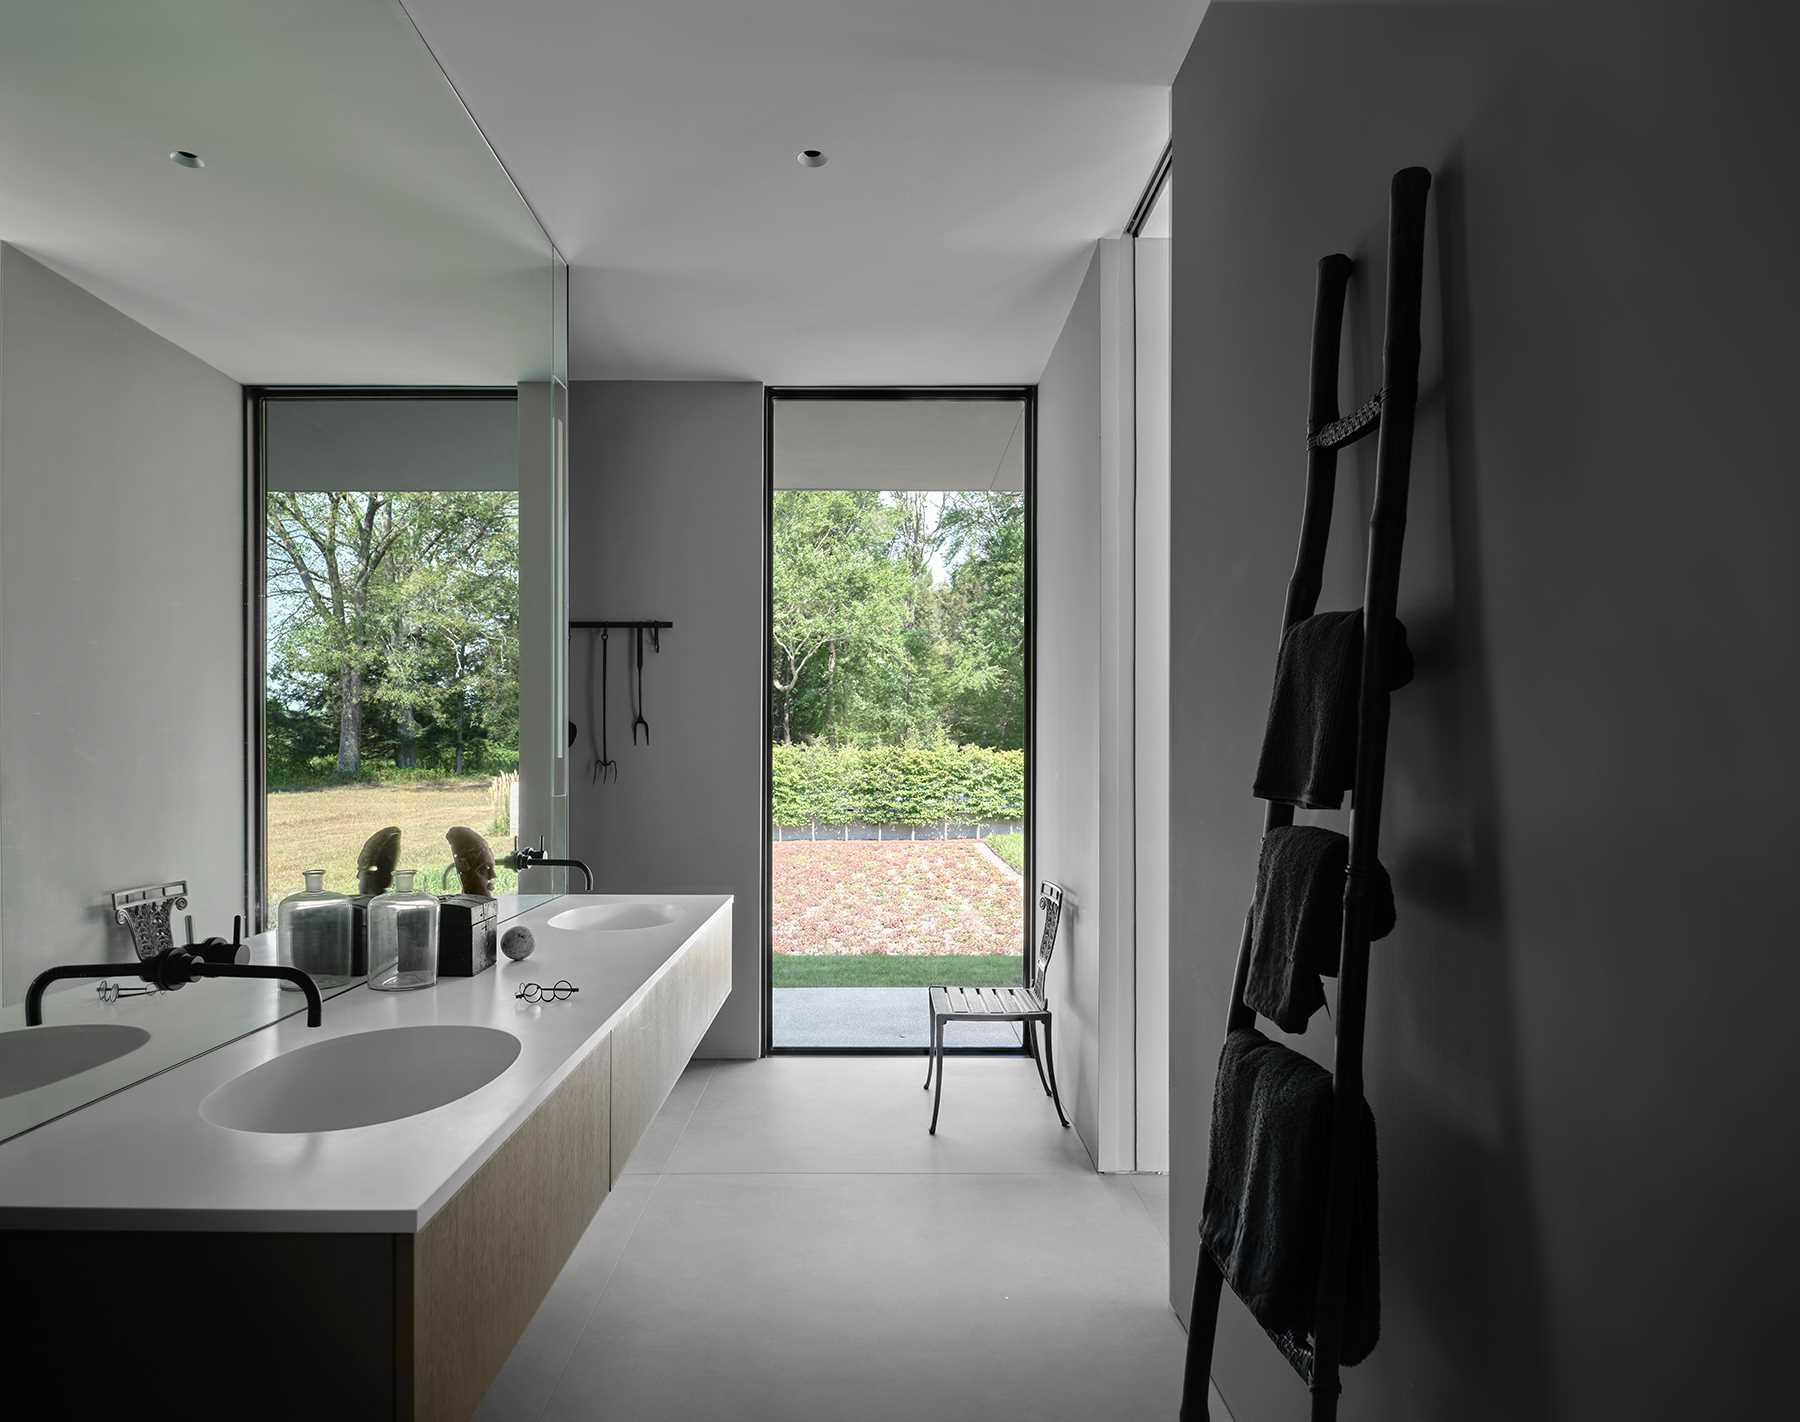 This modern primary bathroom has a floating double vanity, while a vertical window adds natural light.